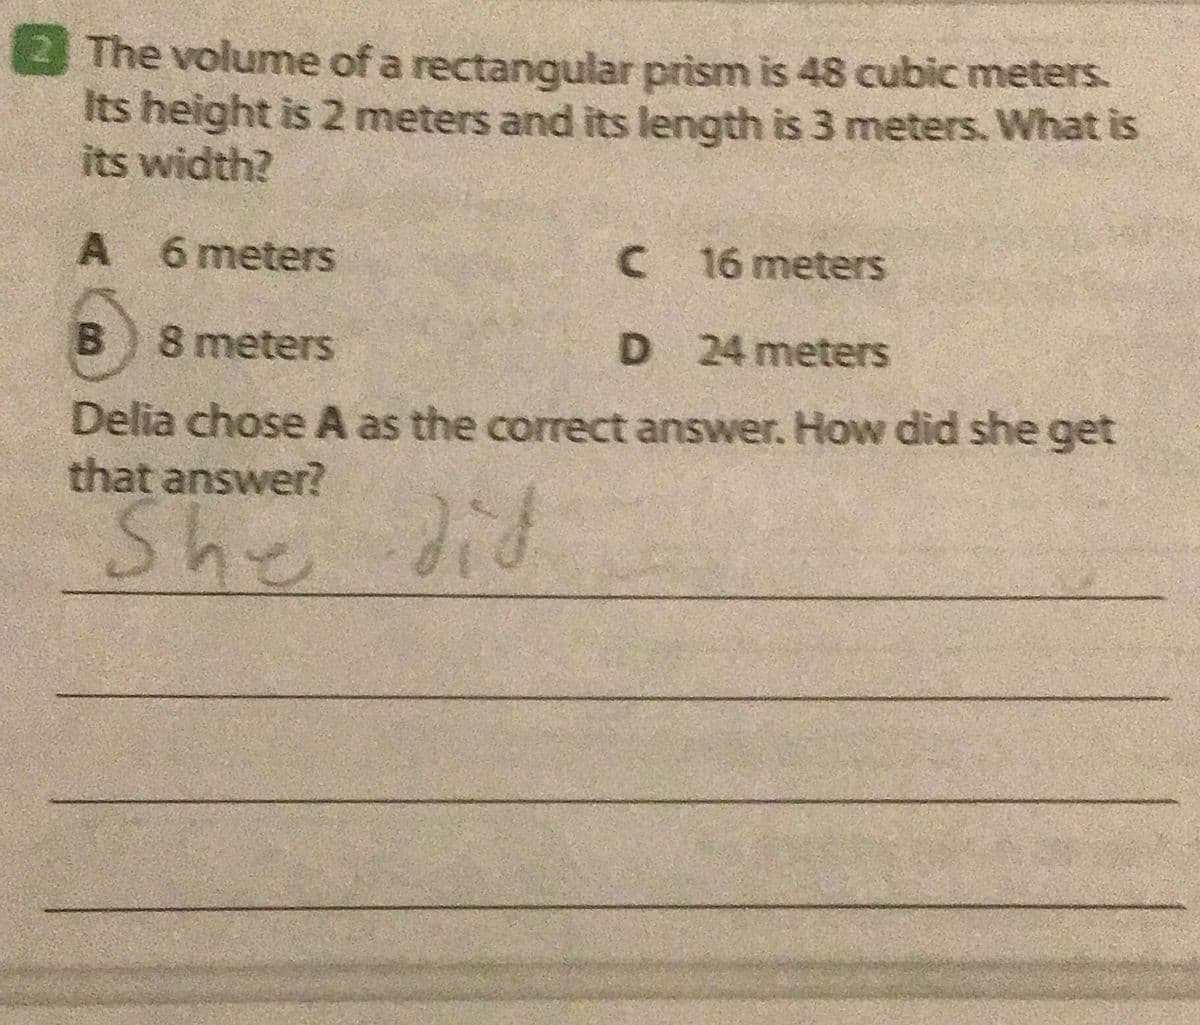 3The volume of a rectangular prism is 48 cubic meters.
Its height is 2 meters and its length is 3 meters. What is
its width?
A 6 meters
C 16 meters
B) 8 meters
D 24 meters
Delia chose A as the correct answer. How did she get
that answer?
She
did
